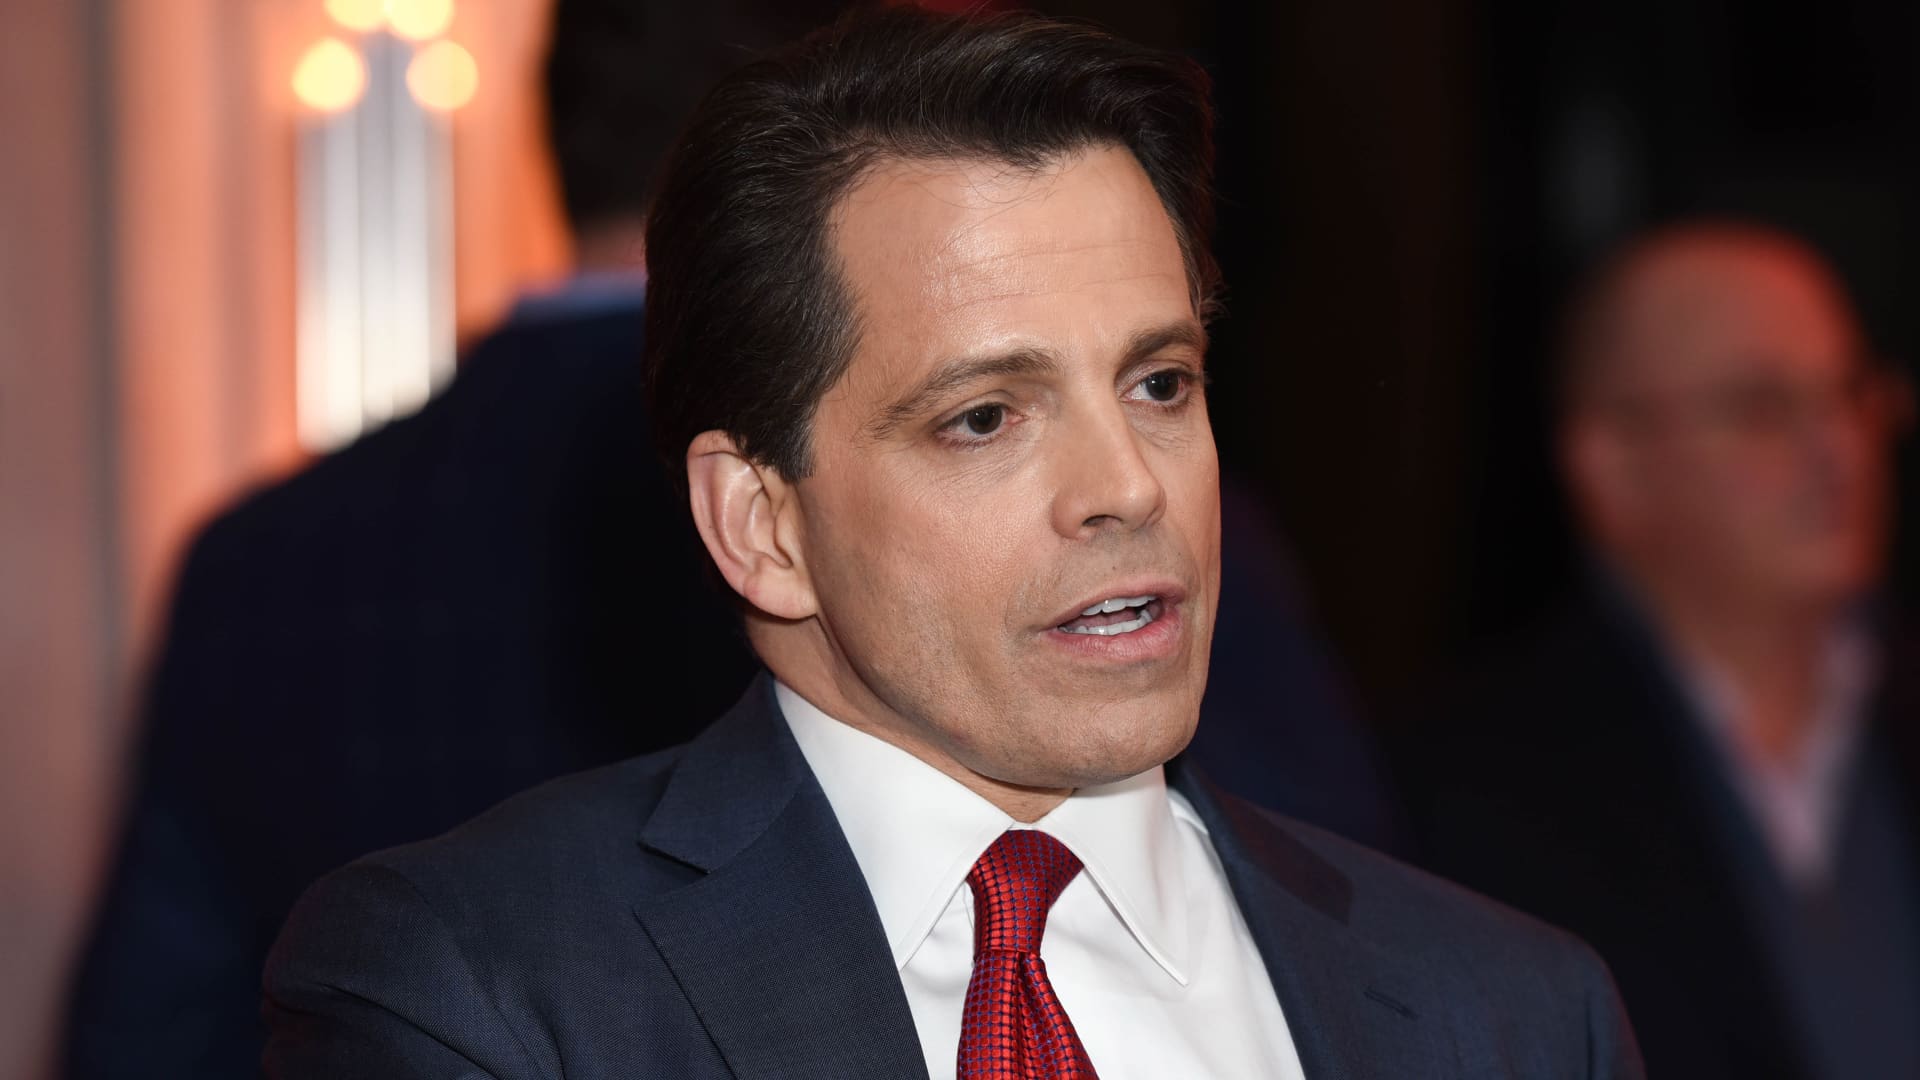 Op-ed: Crypto and blockchain need a trellis, not just a weed killer, says Scaramucci